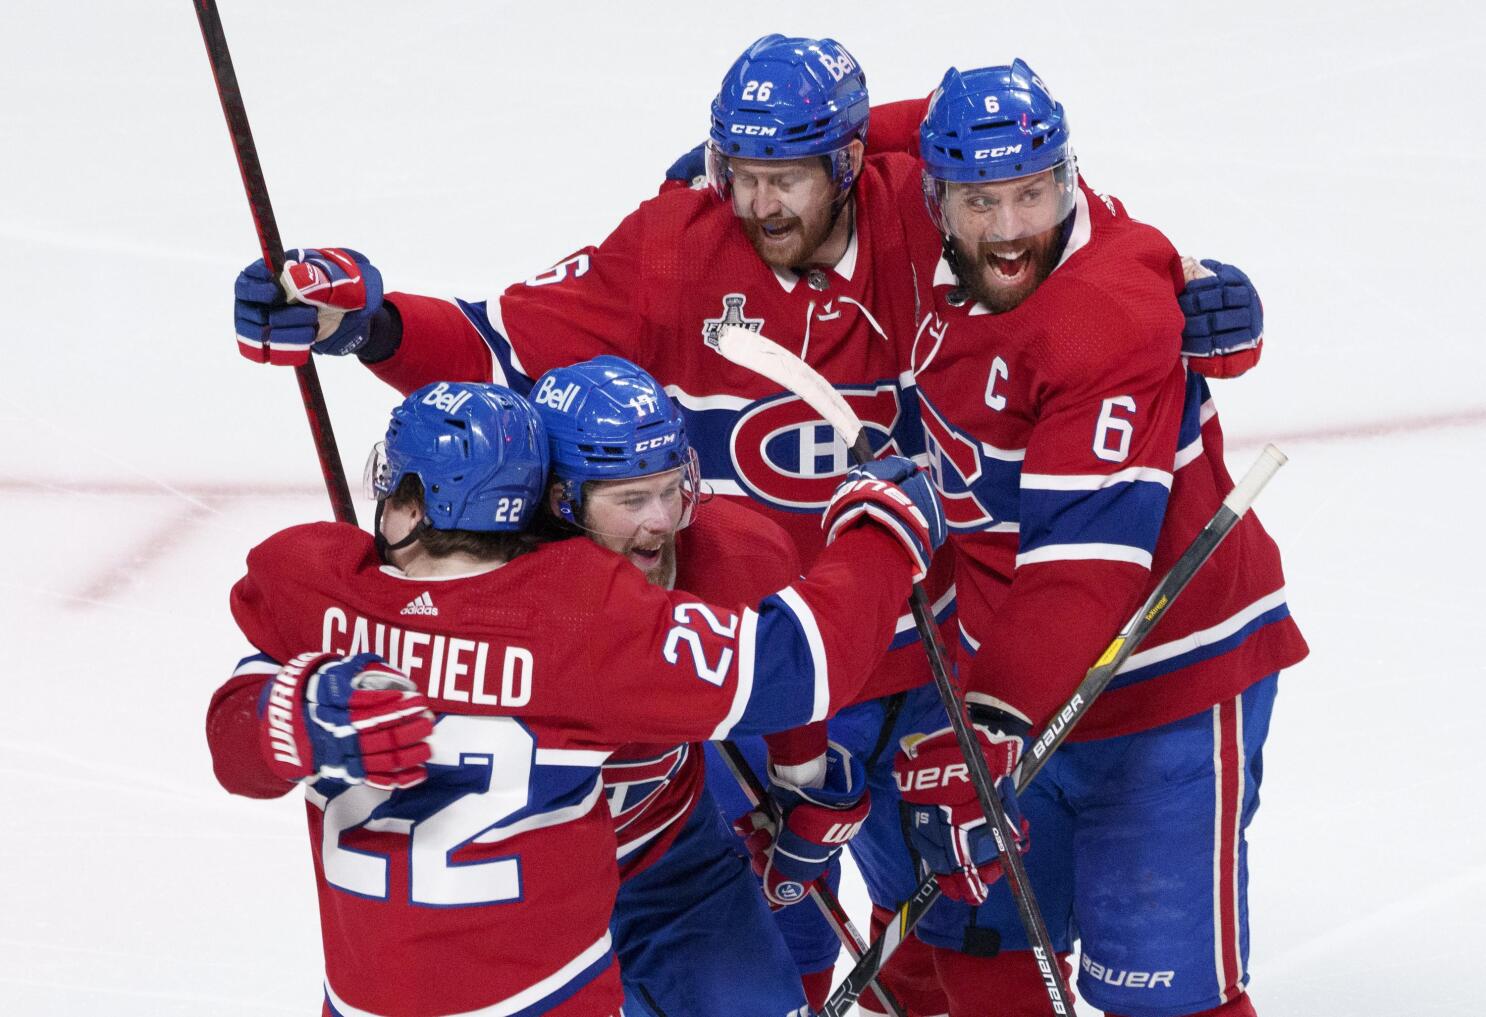 No captain for Habs this season - Montreal